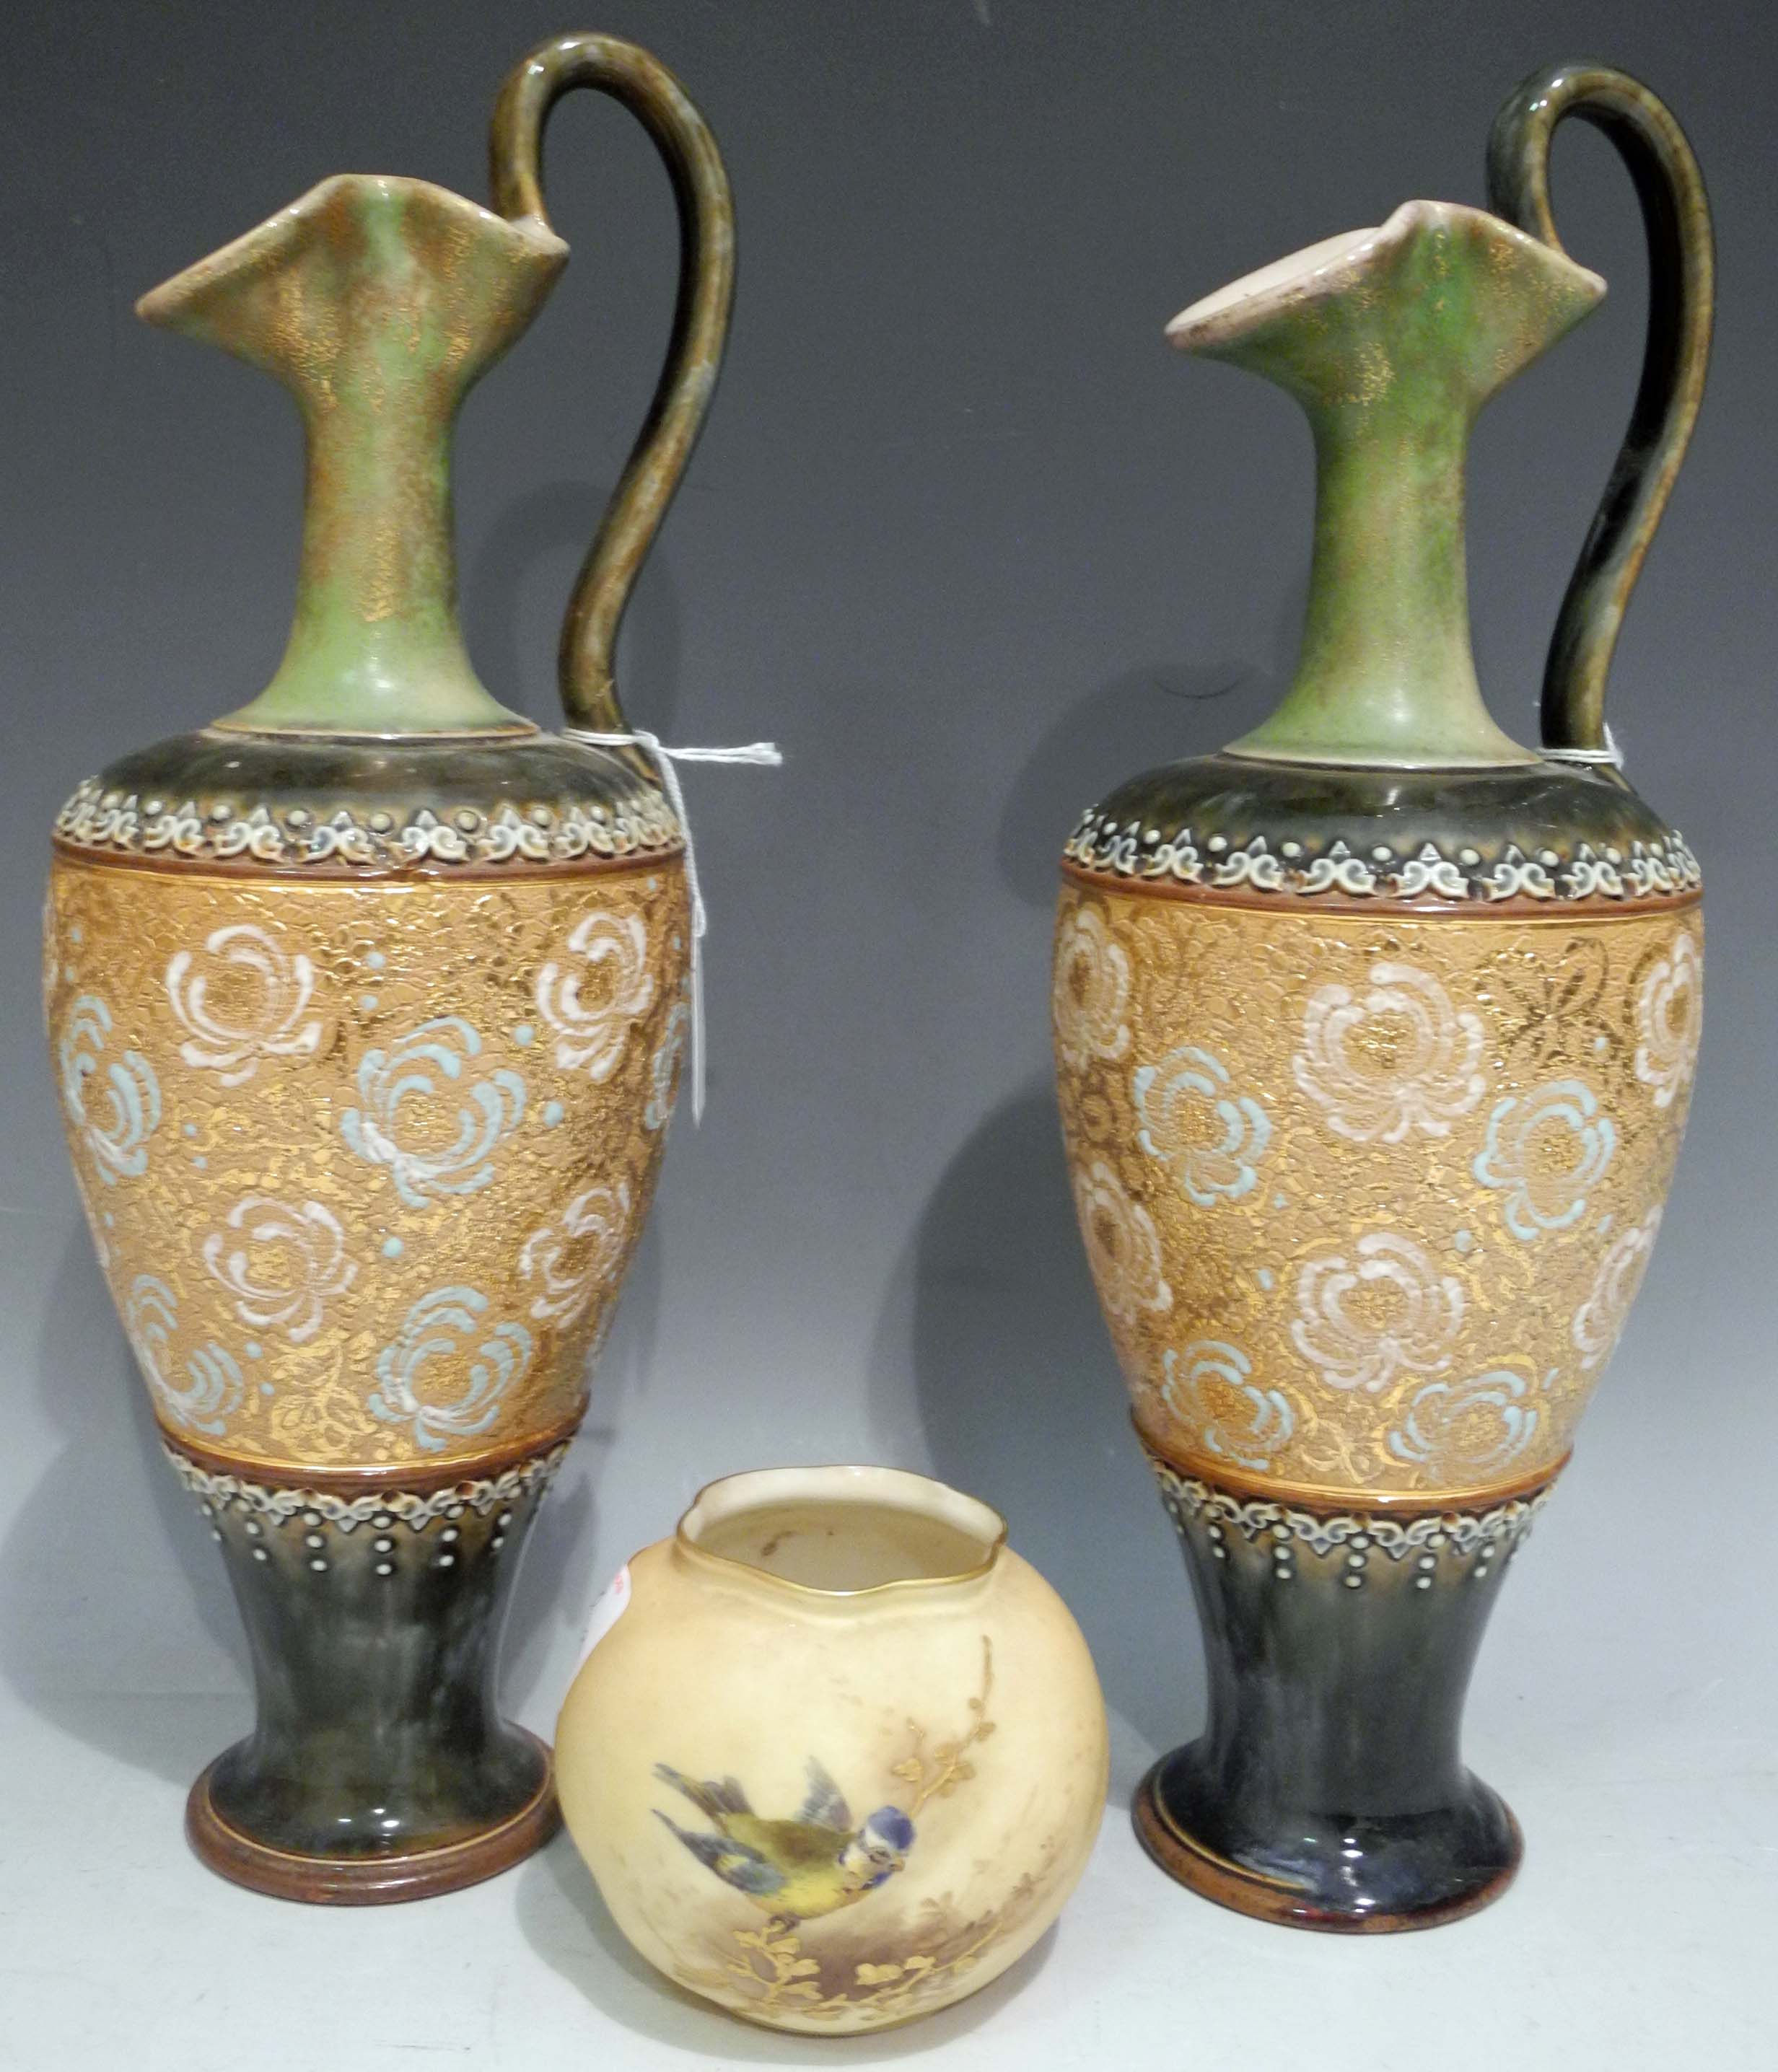 A pair of early 20th Century Royal Doulton stoneware single handled ewers, applied with foliage